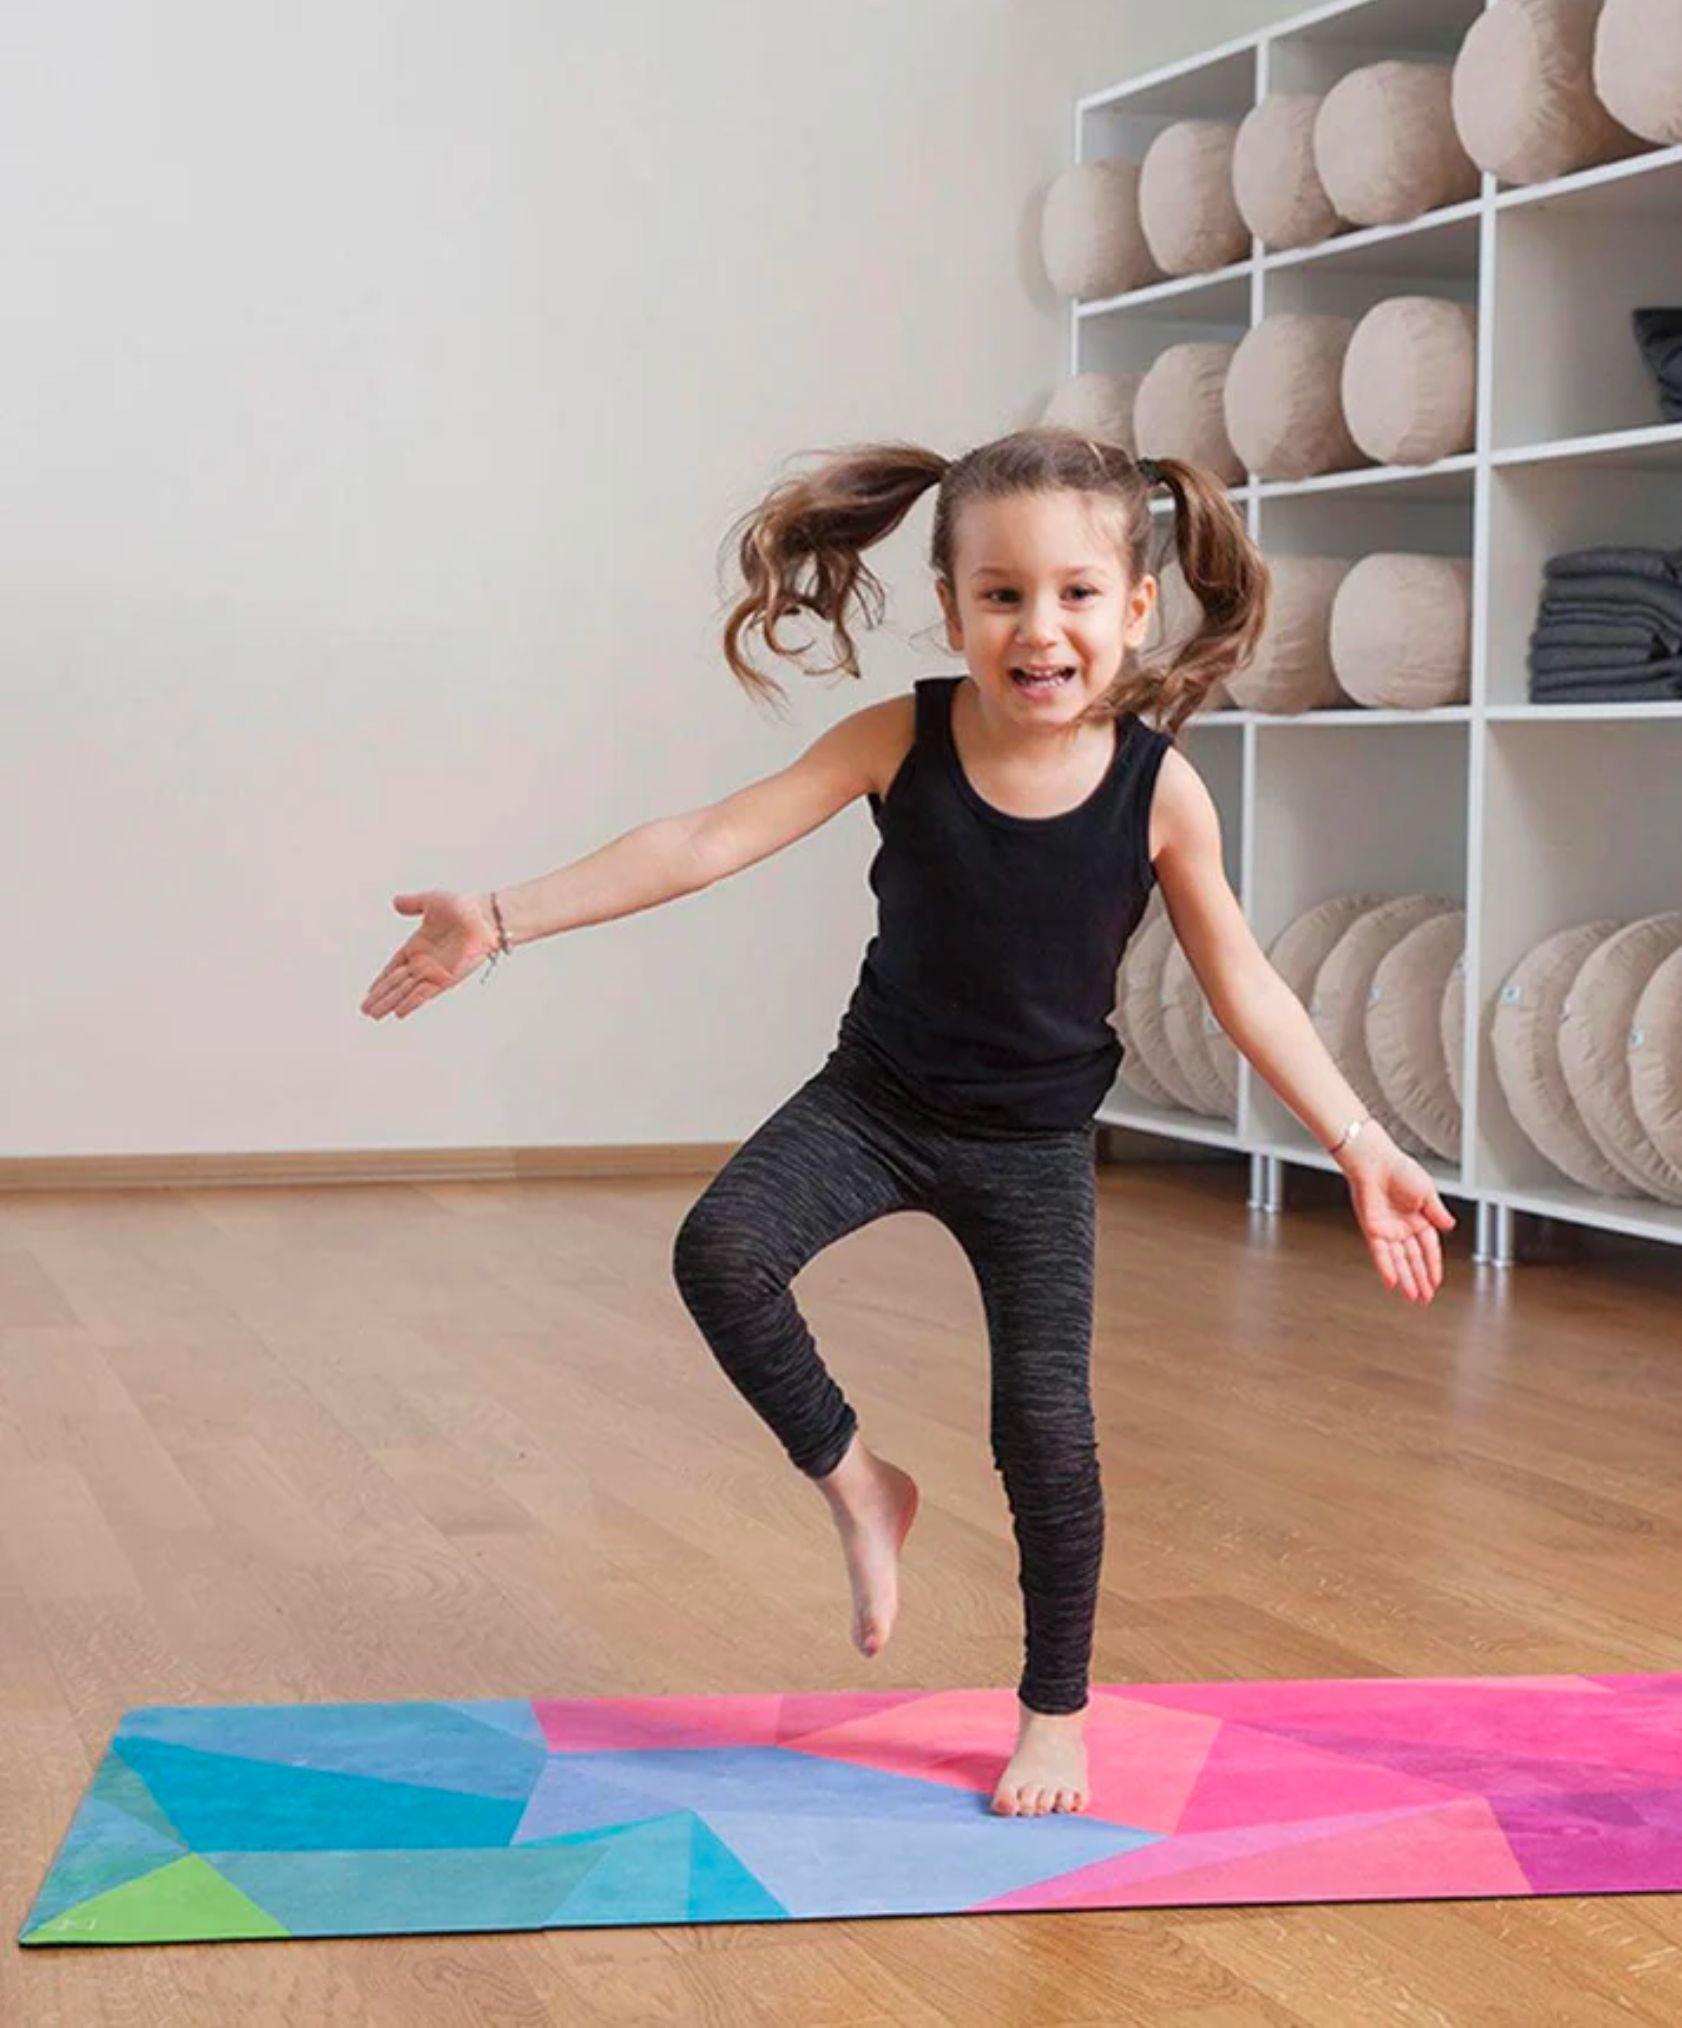 YDL Combo Kid’s Yoga Mat - 2-in-1 (Mat + Towel) For Kids Yoga Practices